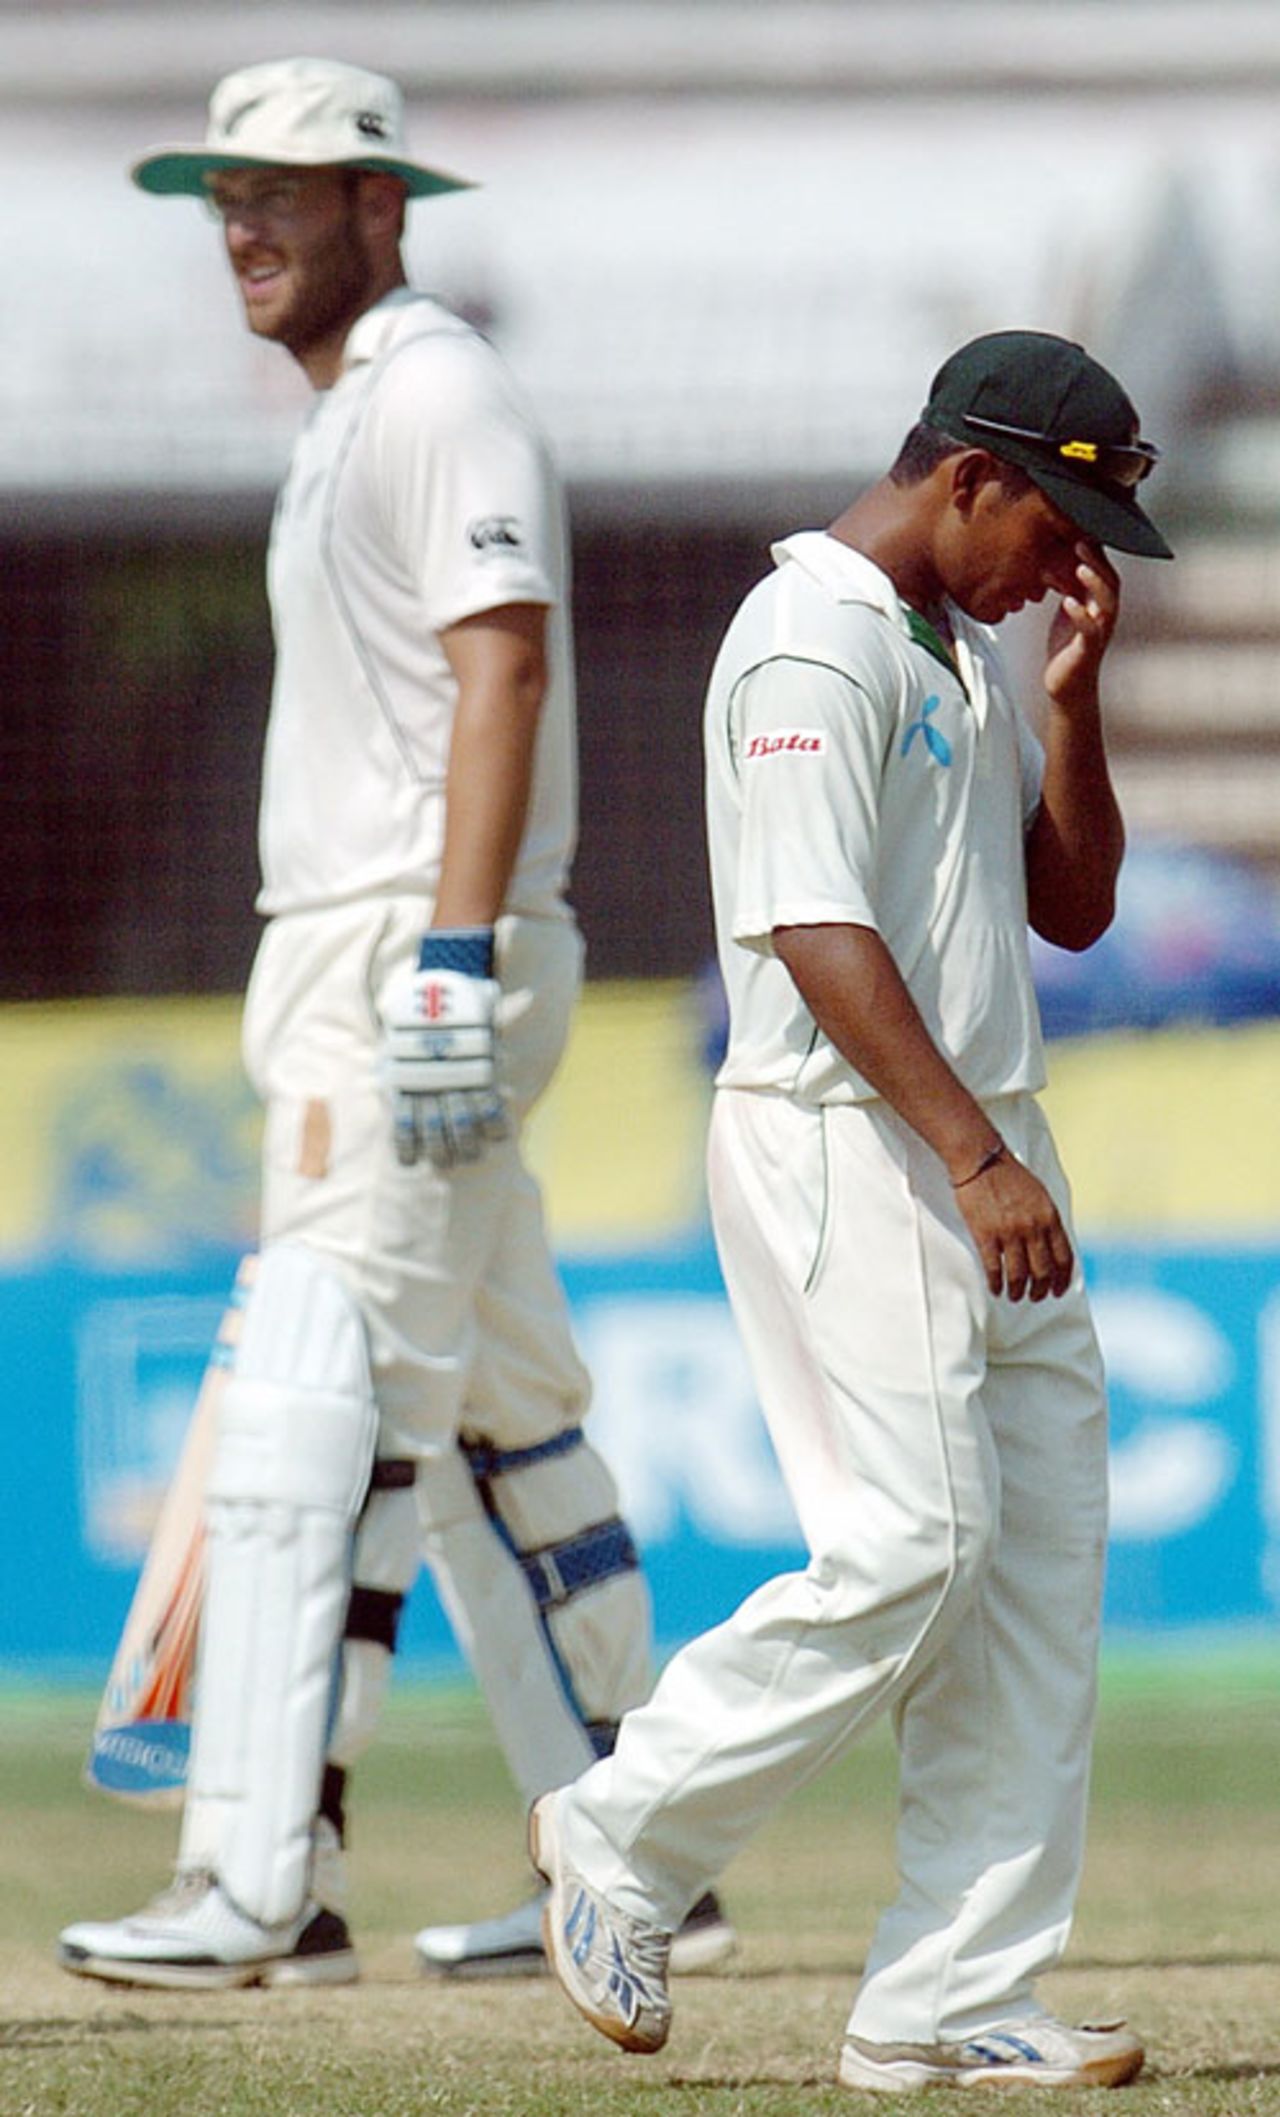 Mohammad Ashraful feels the frustration as Daniel Vettori takes New Zealand closer to their target, Bangladesh v New Zealand, 1st Test, Chittagong, 5th day, October 21, 2008